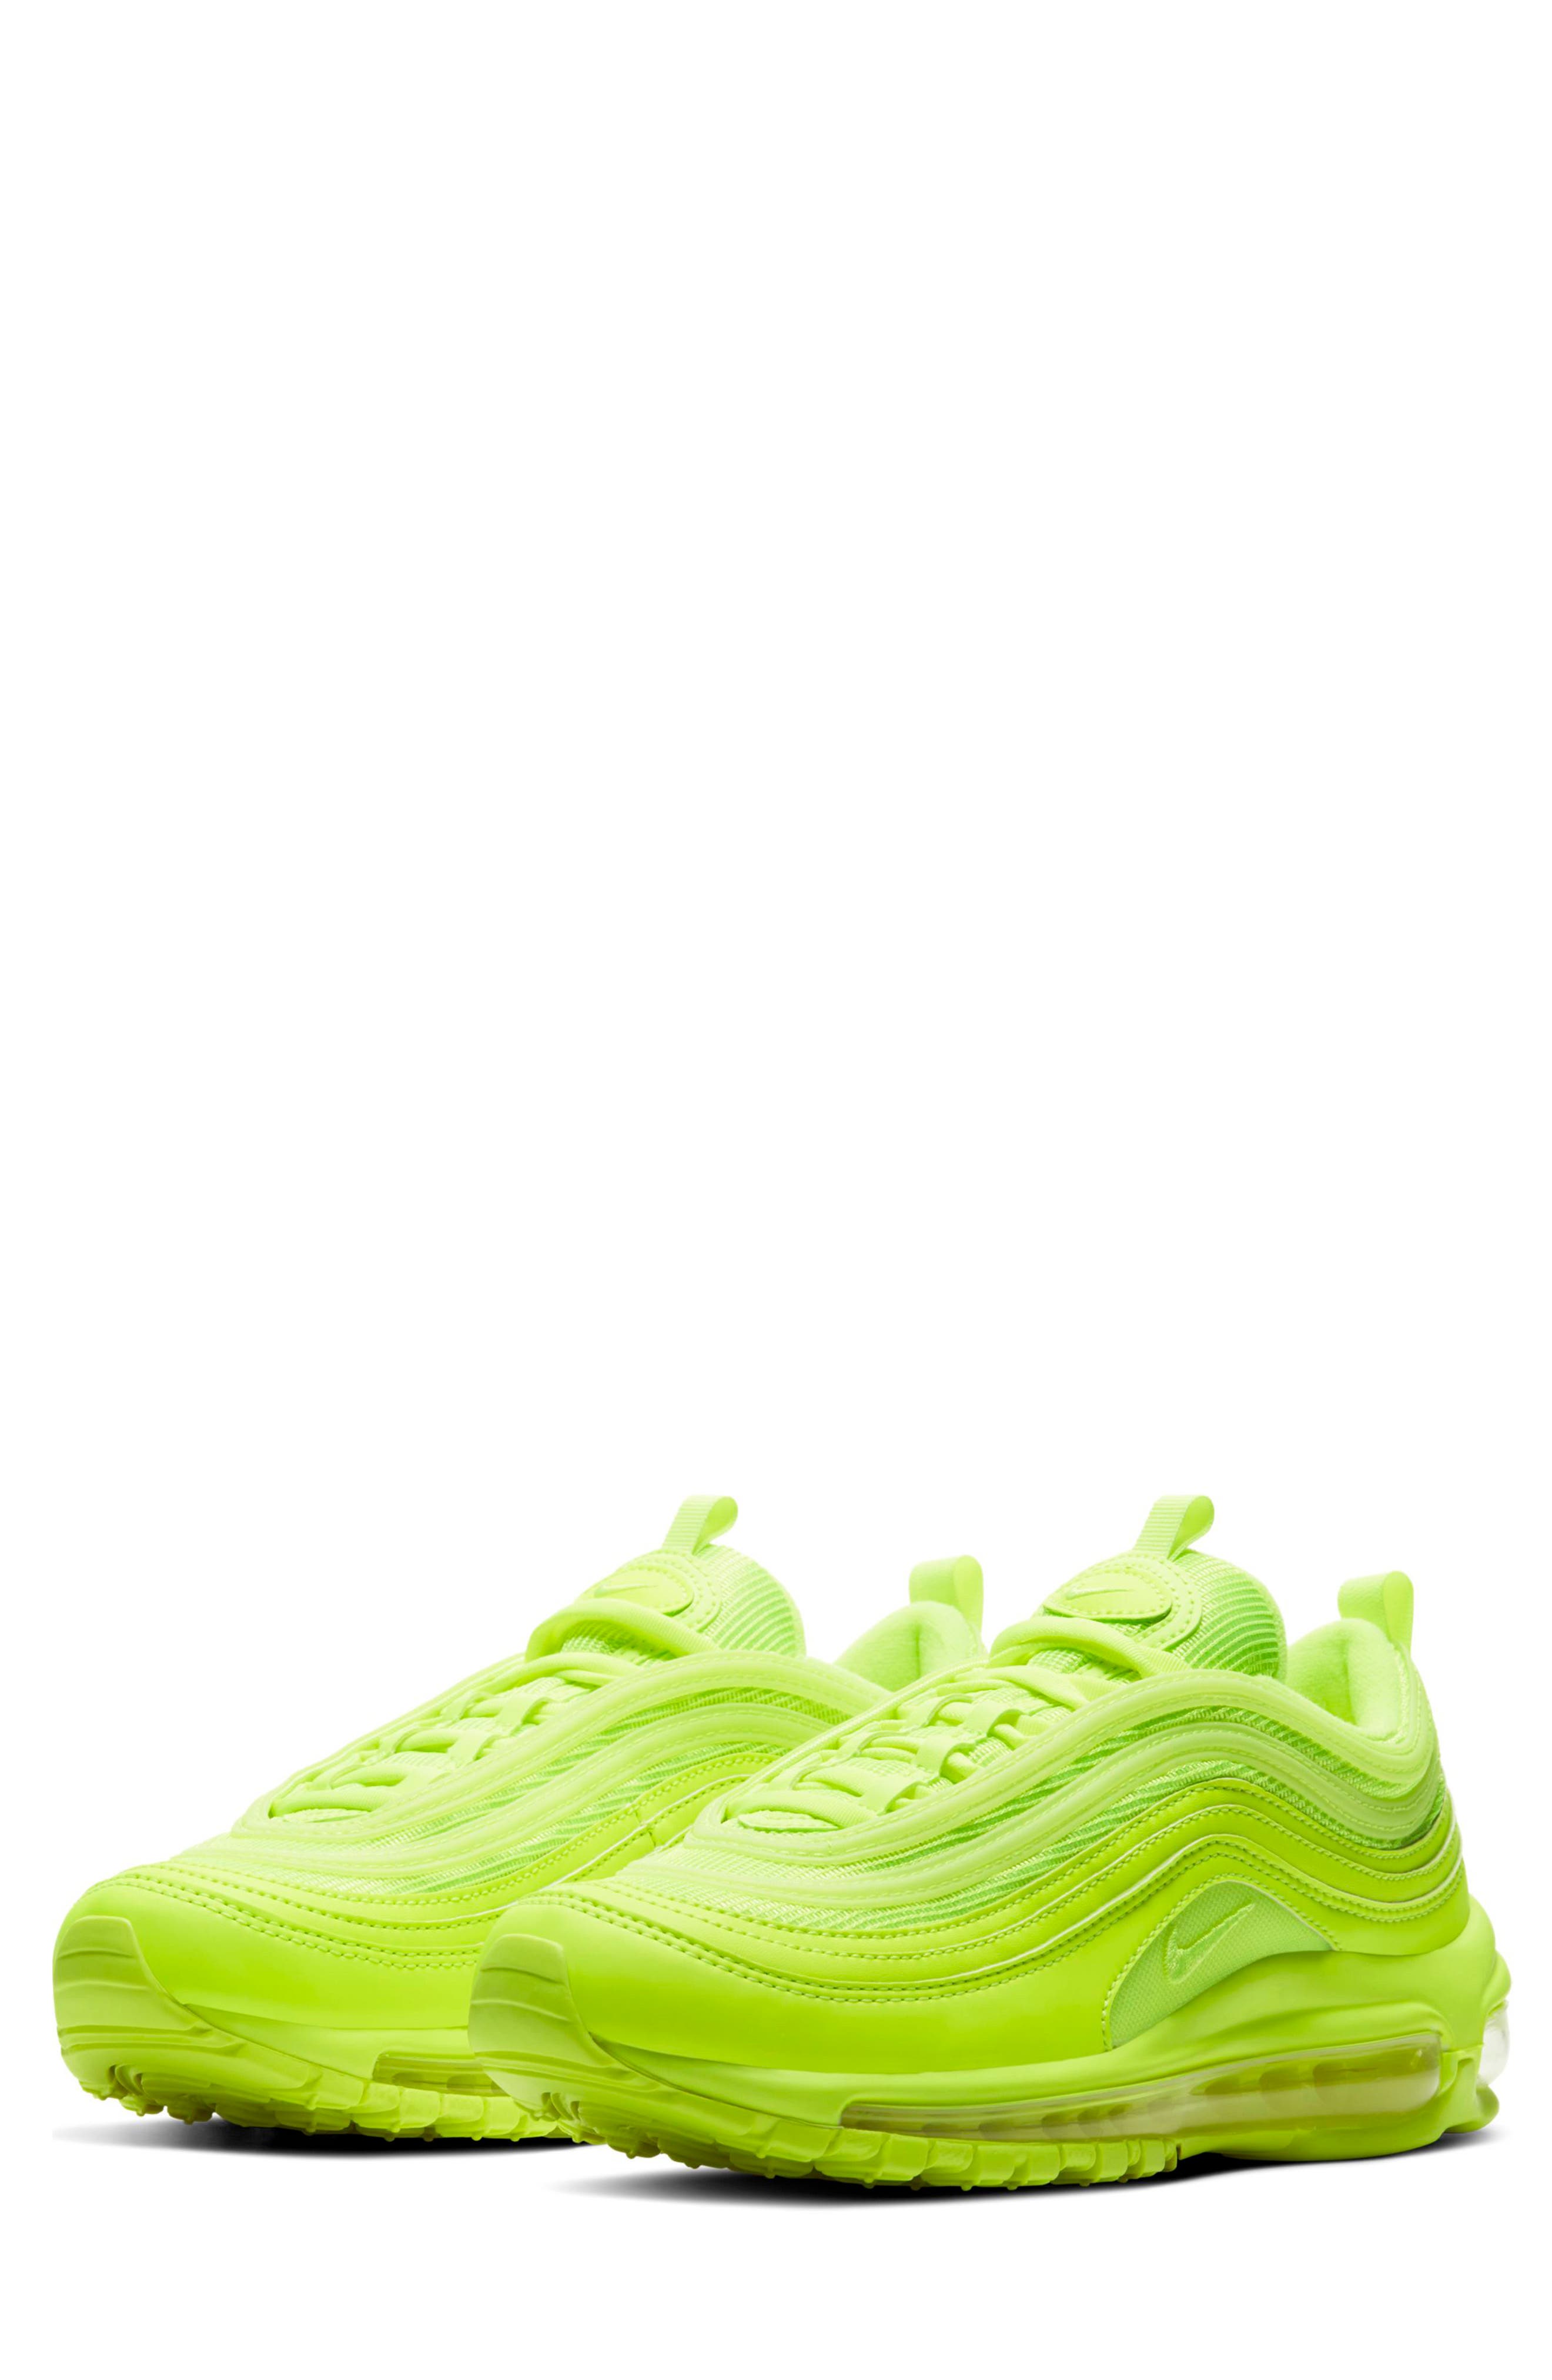 UPC 194274400649 product image for Women's Nike Air Max 97 Sneaker, Size 6.5 M - Yellow | upcitemdb.com